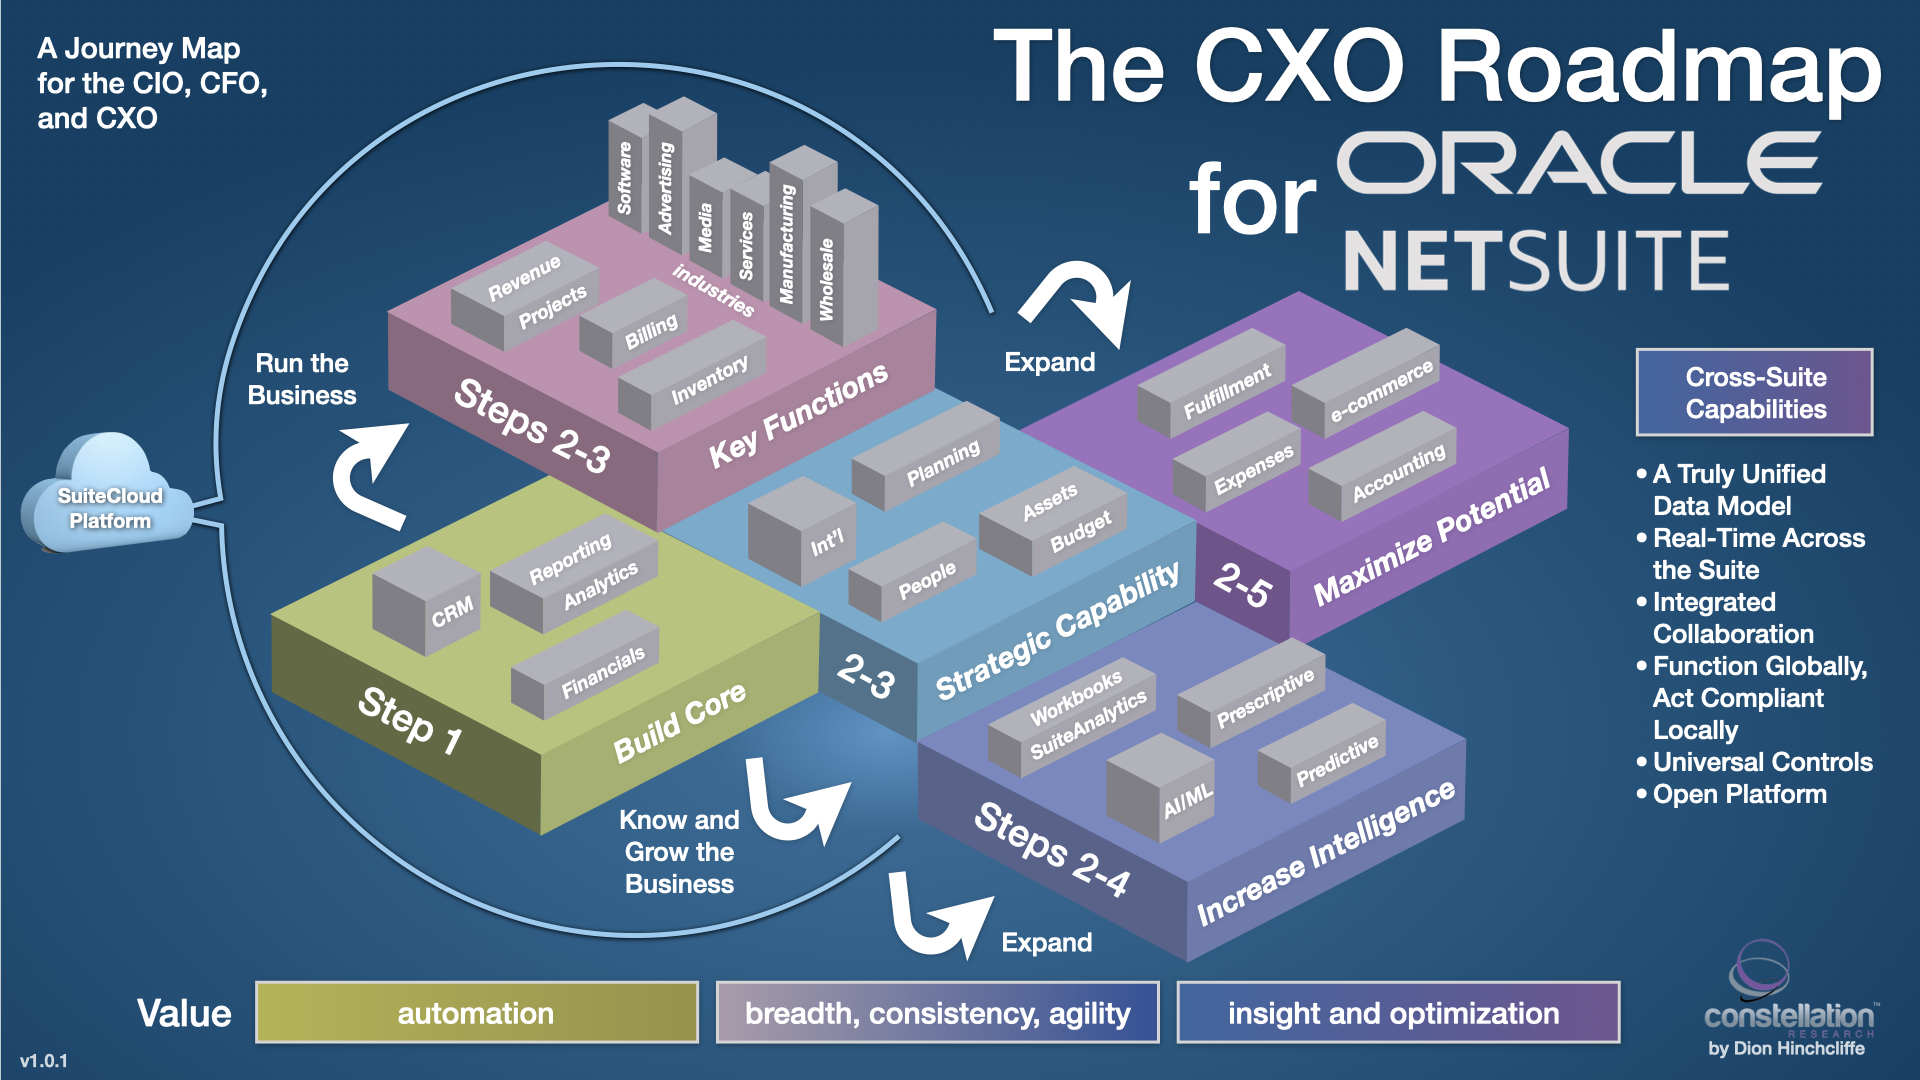 An Oracle NetSuite Roadmap for the CIO and CFO Constellation Research